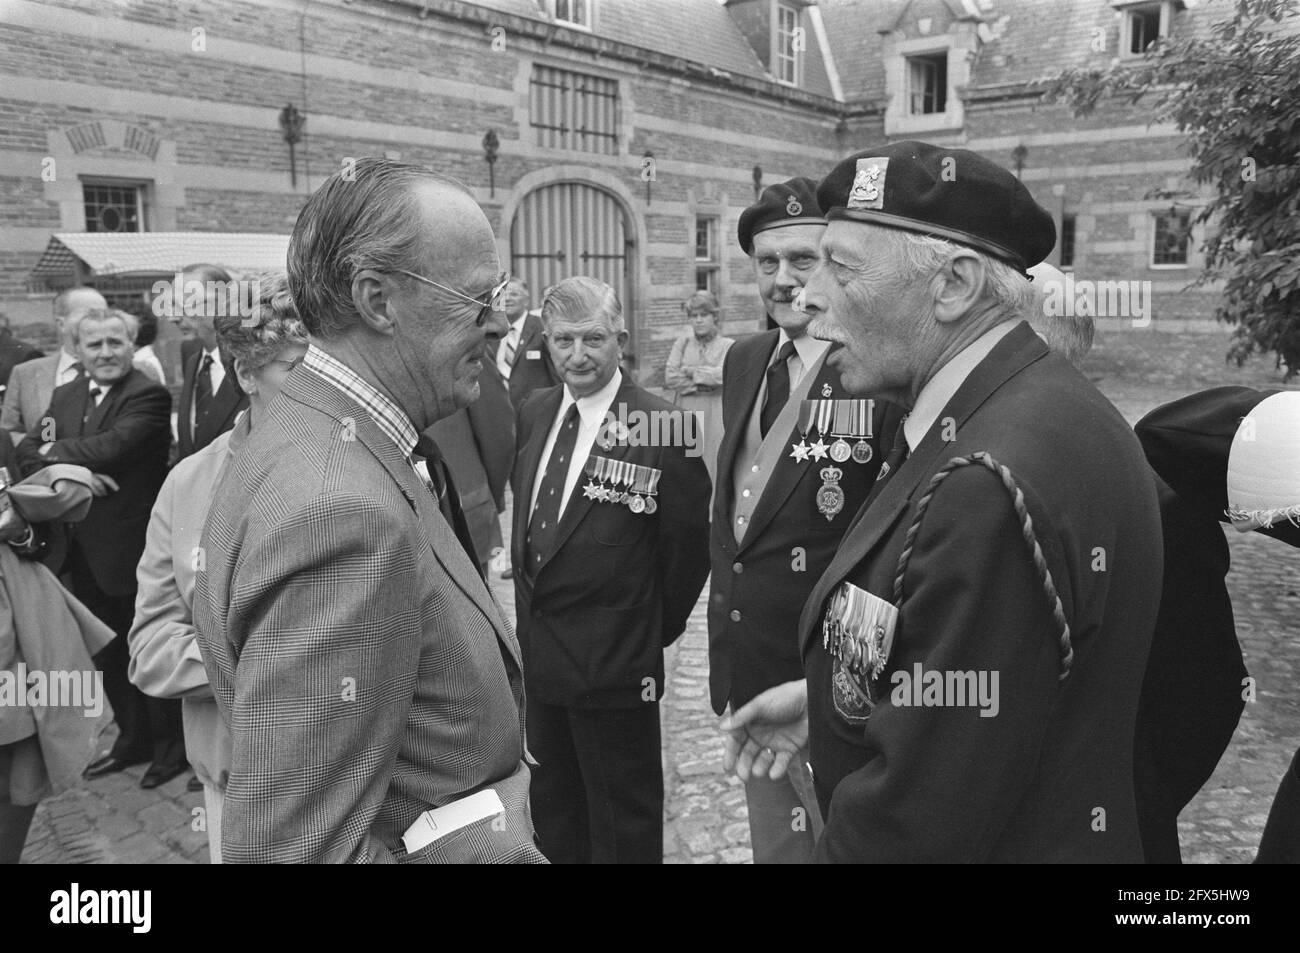 Prince Bernhard attends the meeting on the occasion of the 40th anniversary of the liberation in Heeswijk-Dinter; Bernhard in conversation, September 19, 1984, The Netherlands, 20th century press agency photo, news to remember, documentary, historic photography 1945-1990, visual stories, human history of the Twentieth Century, capturing moments in time Stock Photo